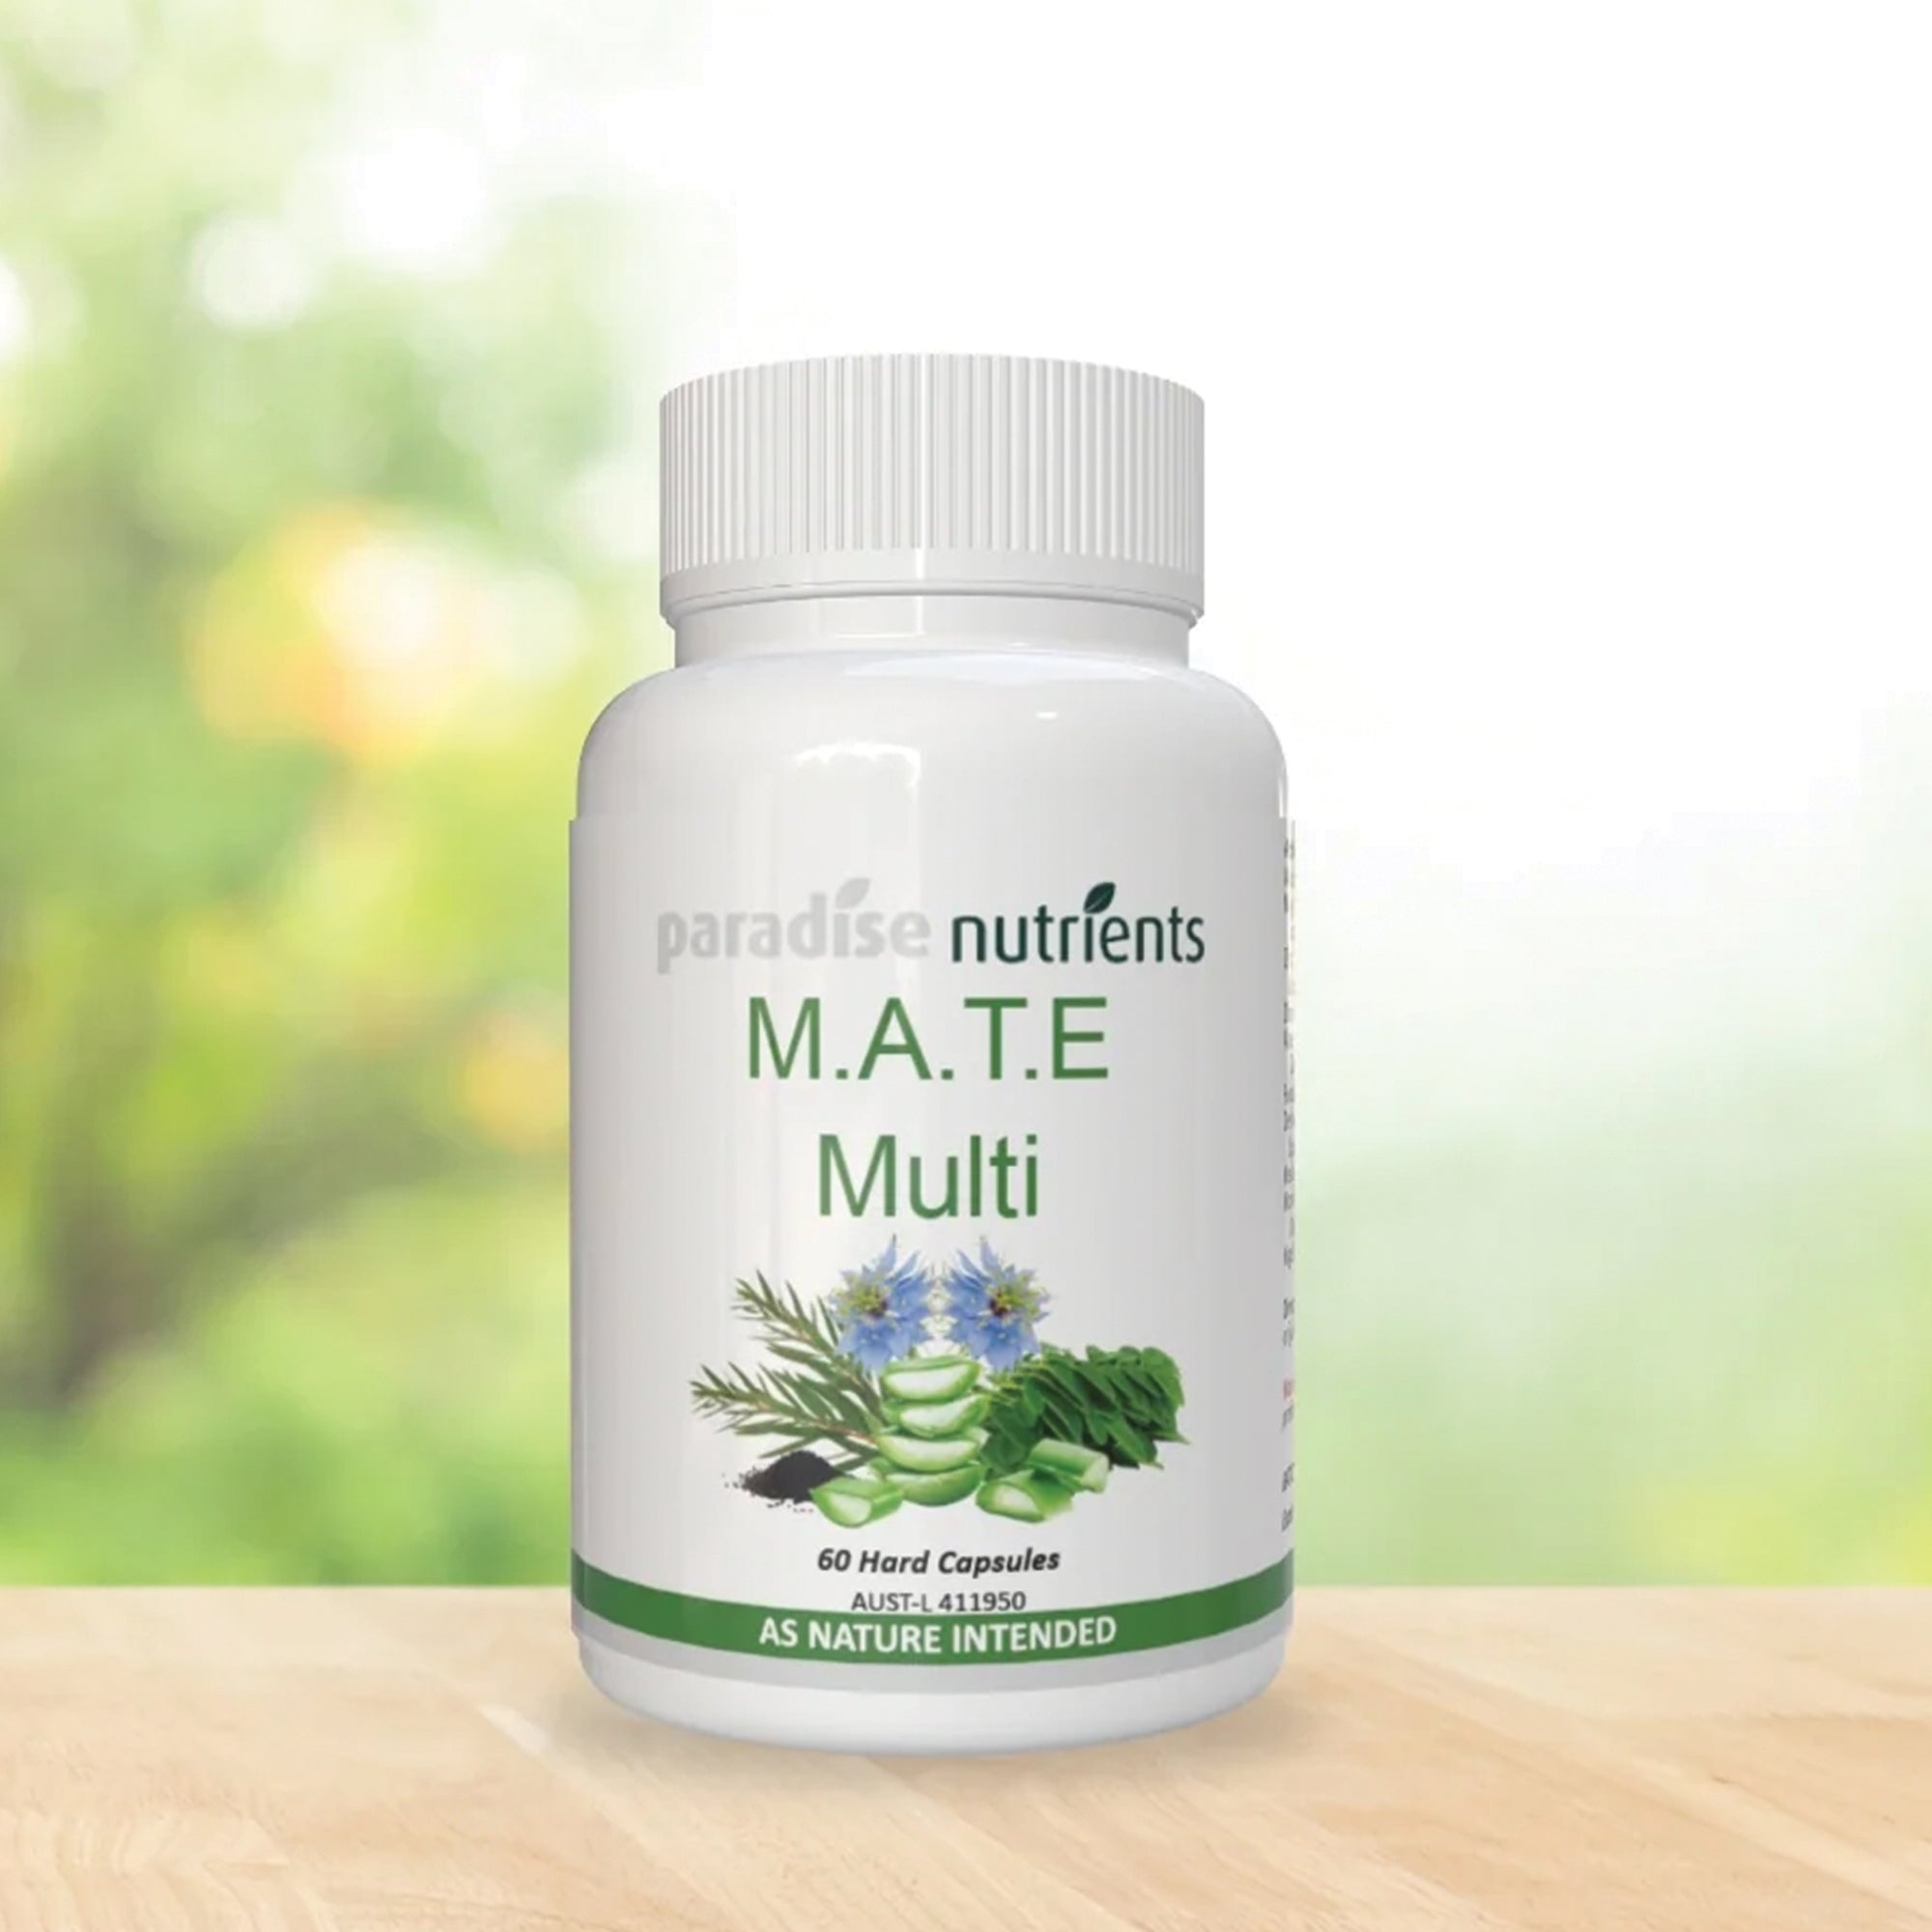 More Than Charms M.A.T.E. Immune Support